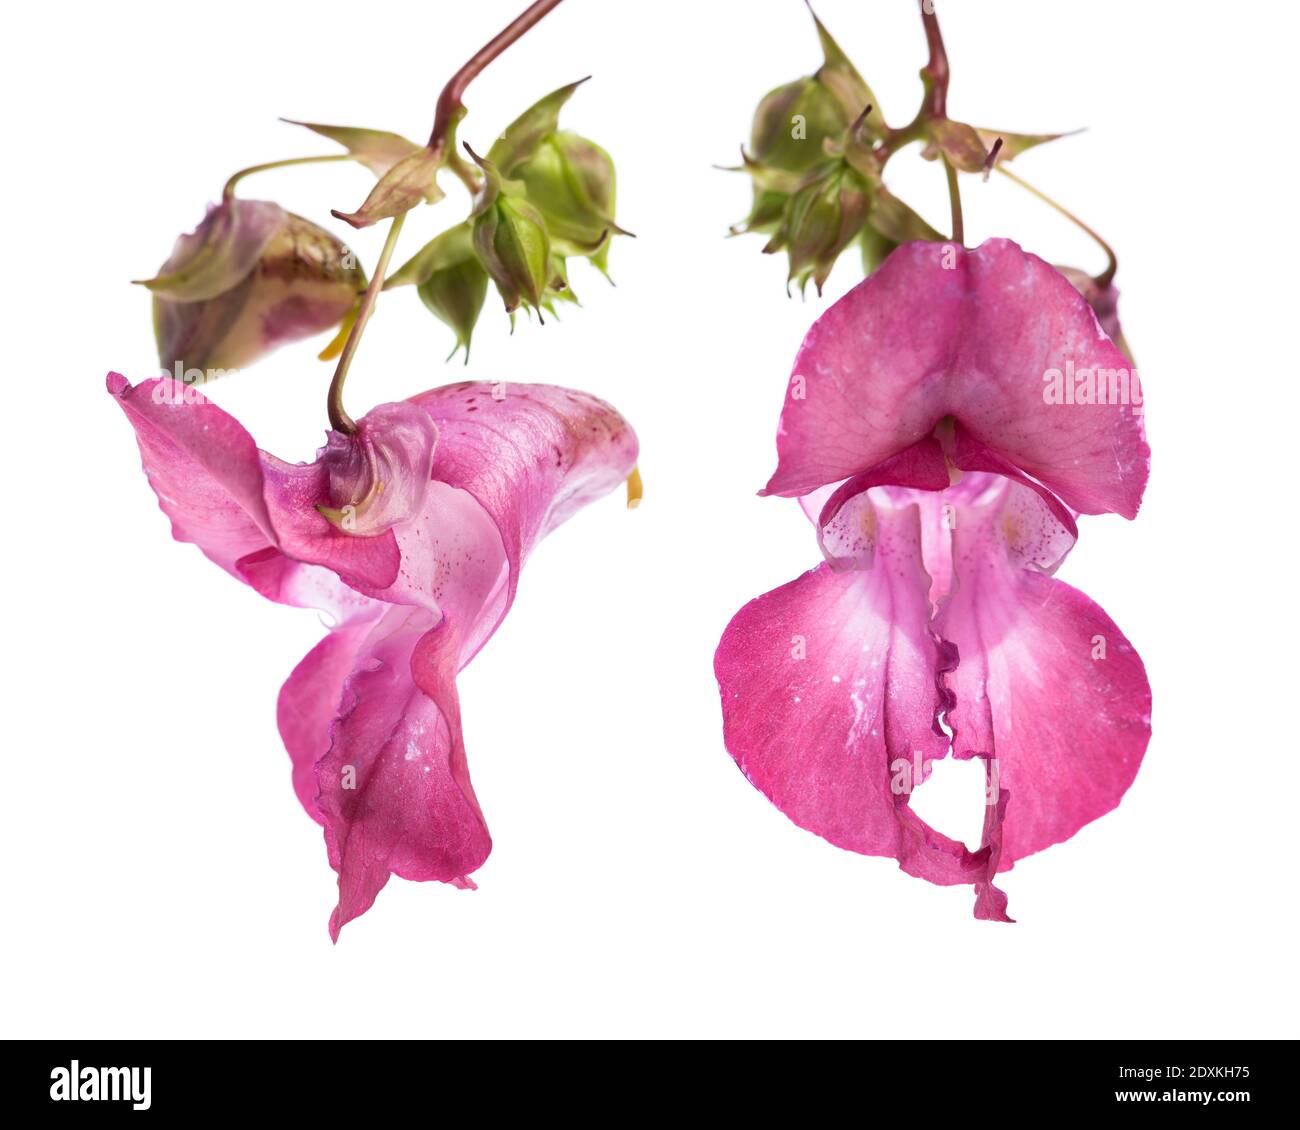 plant studies: Himalayan Balsam - Indian balsam (Impatiens glandulifera) Flower of the front and side Stock Photo